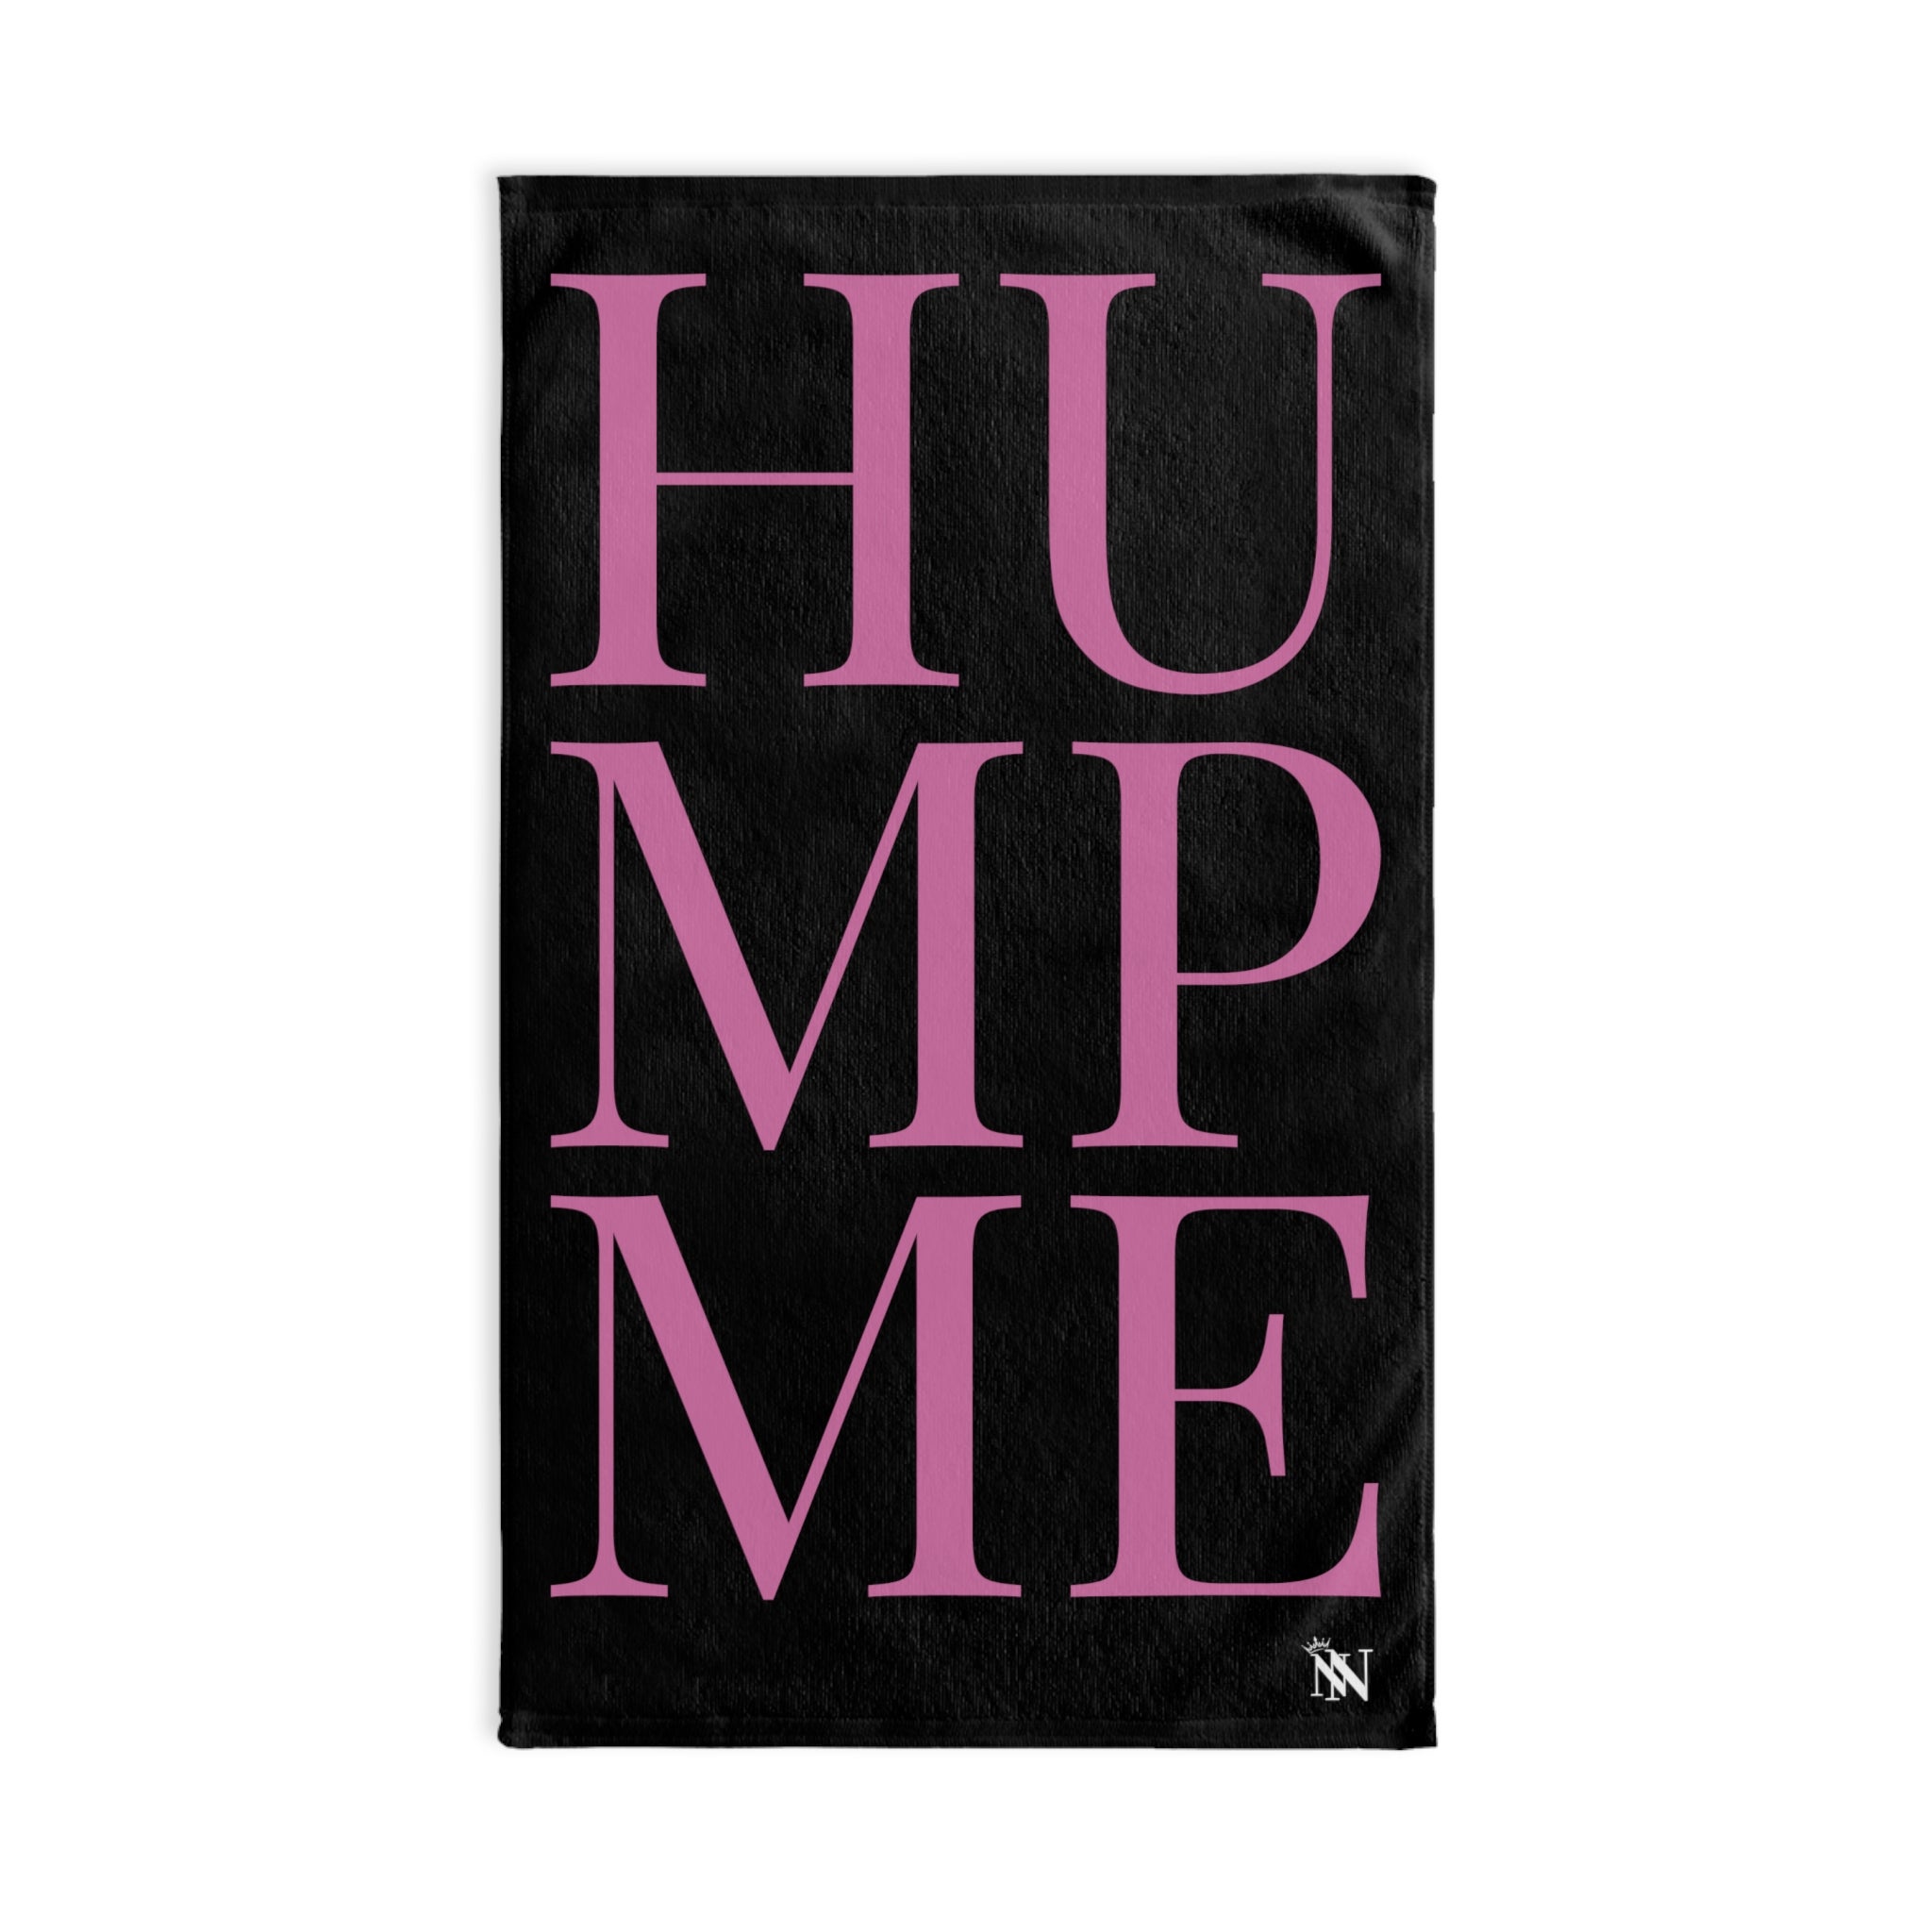 Hump Me Pink Black | Sexy Gifts for Boyfriend, Funny Towel Romantic Gift for Wedding Couple Fiance First Year 2nd Anniversary Valentines, Party Gag Gifts, Joke Humor Cloth for Husband Men BF NECTAR NAPKINS